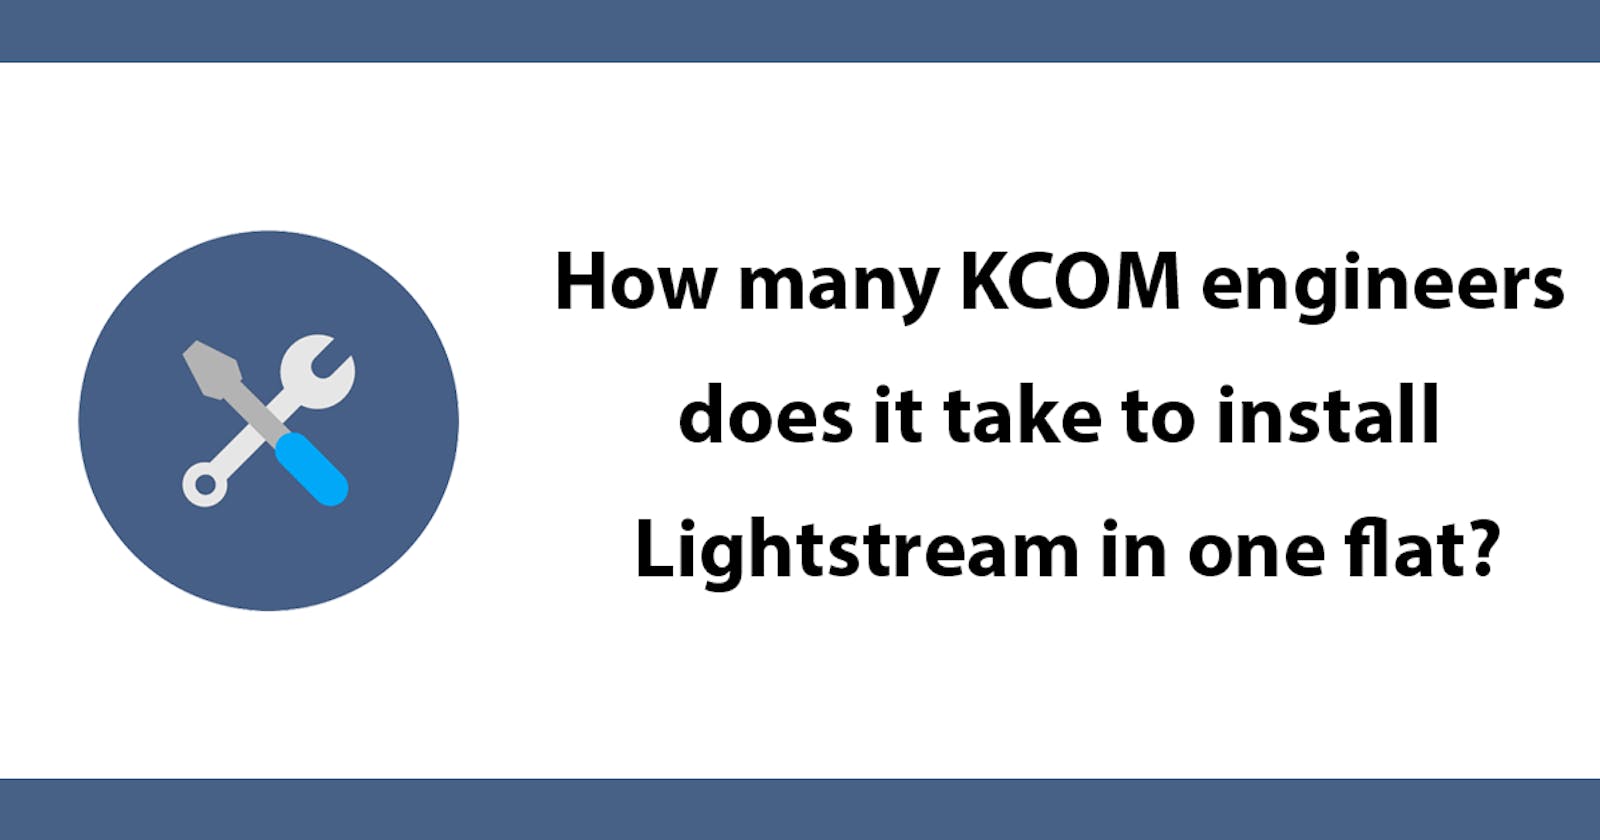 How many KCOM engineers does it take to install Lightstream in one flat?